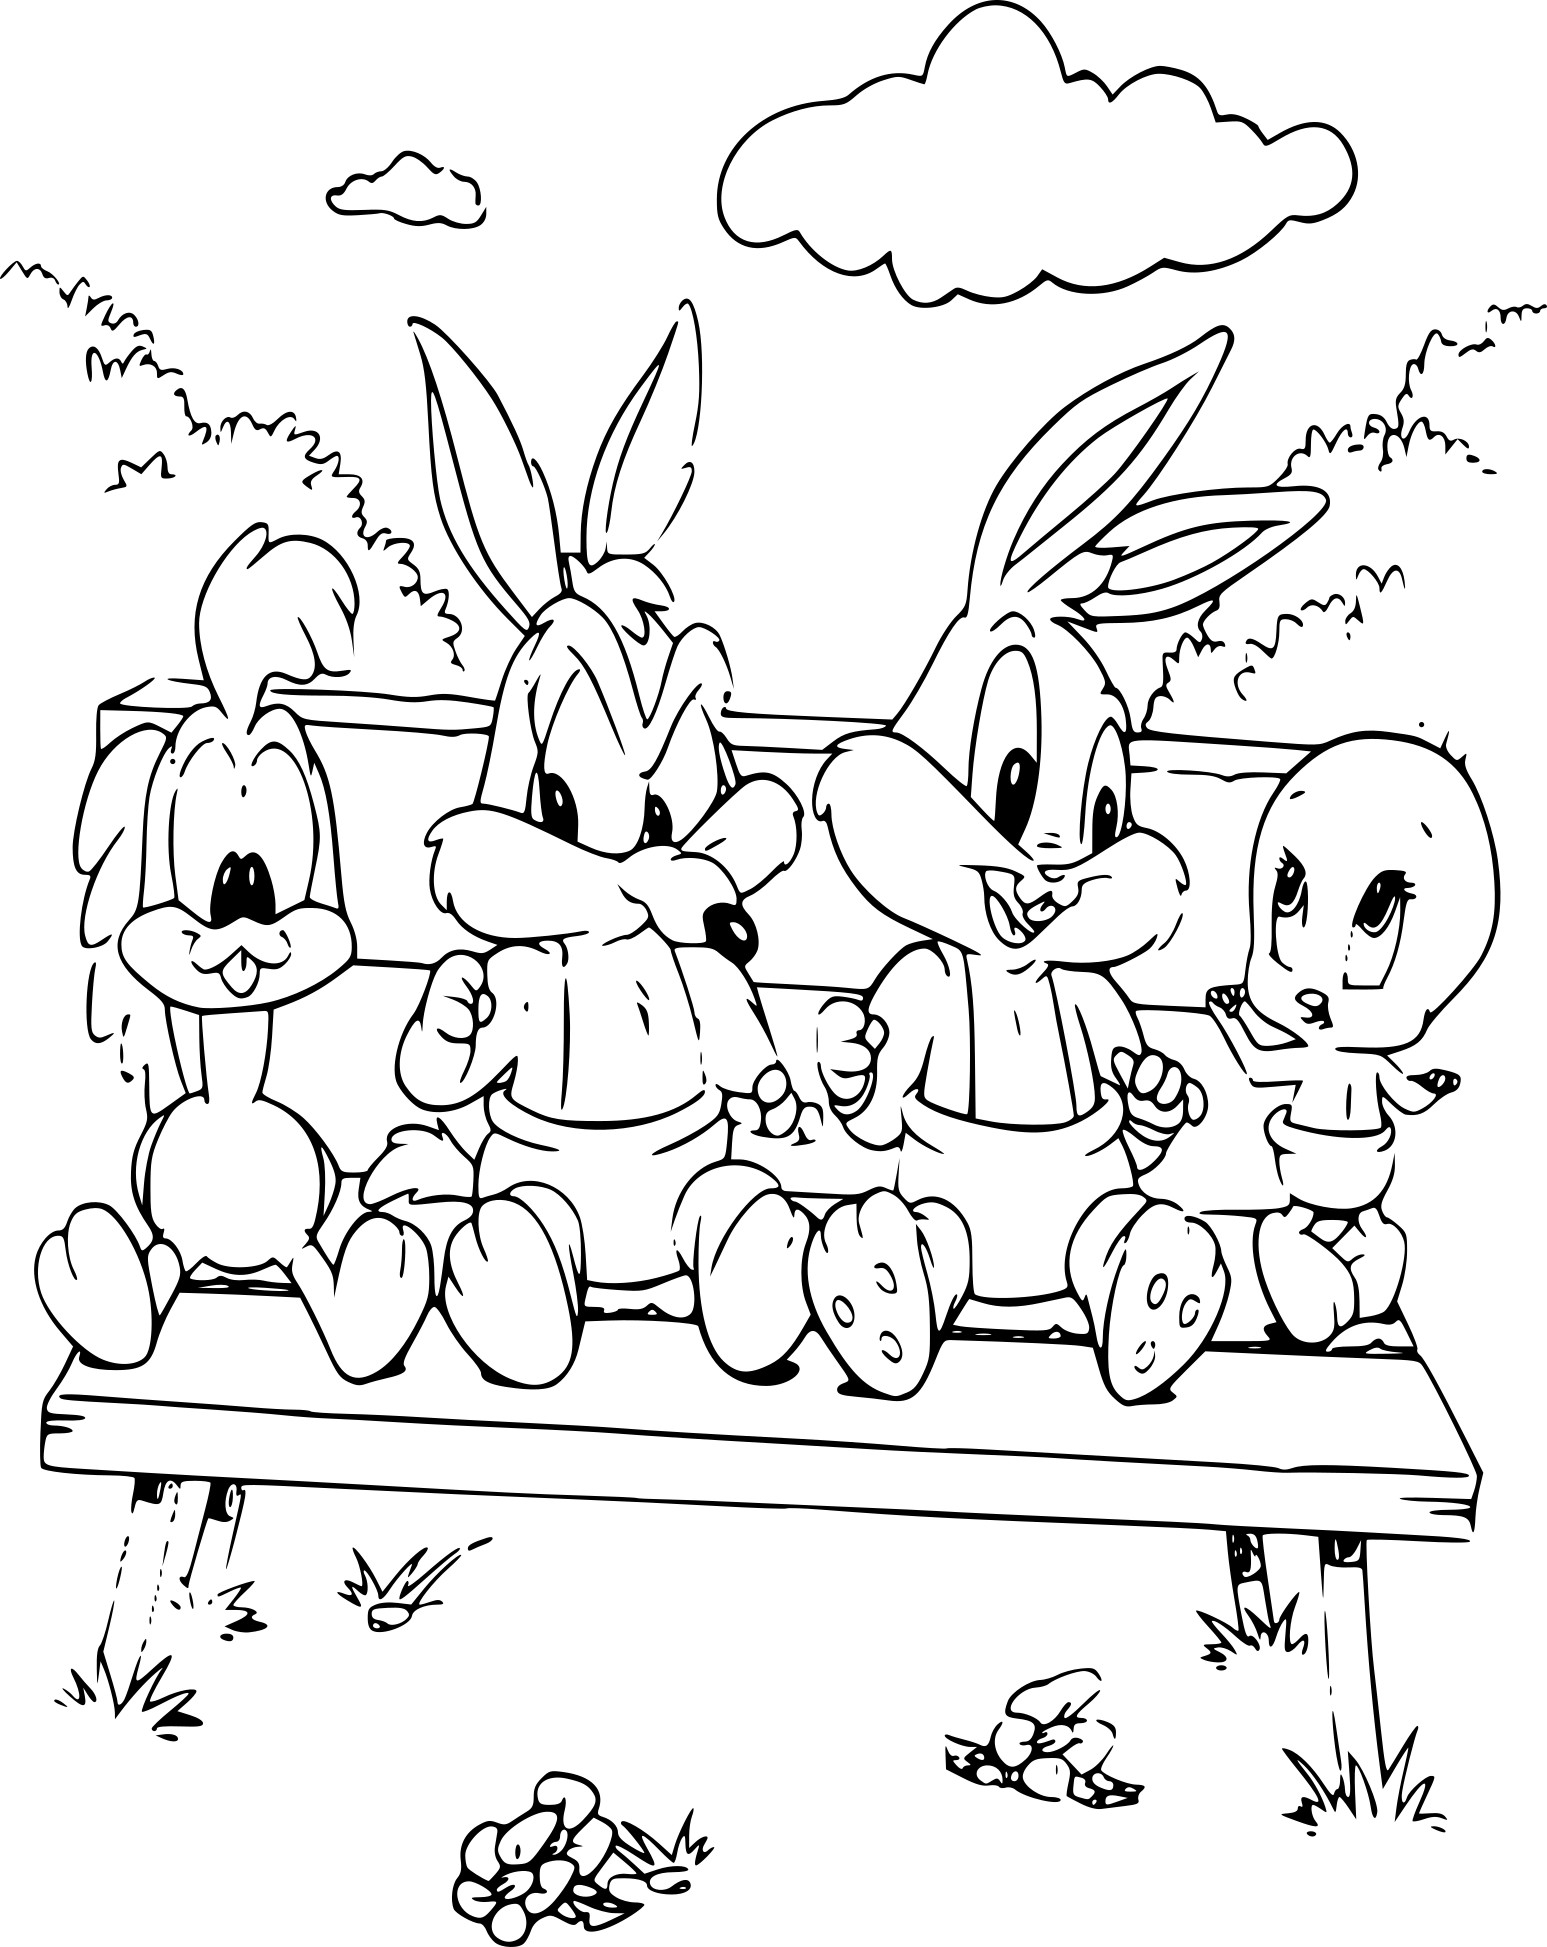 coloring pages of the baby looney tunes